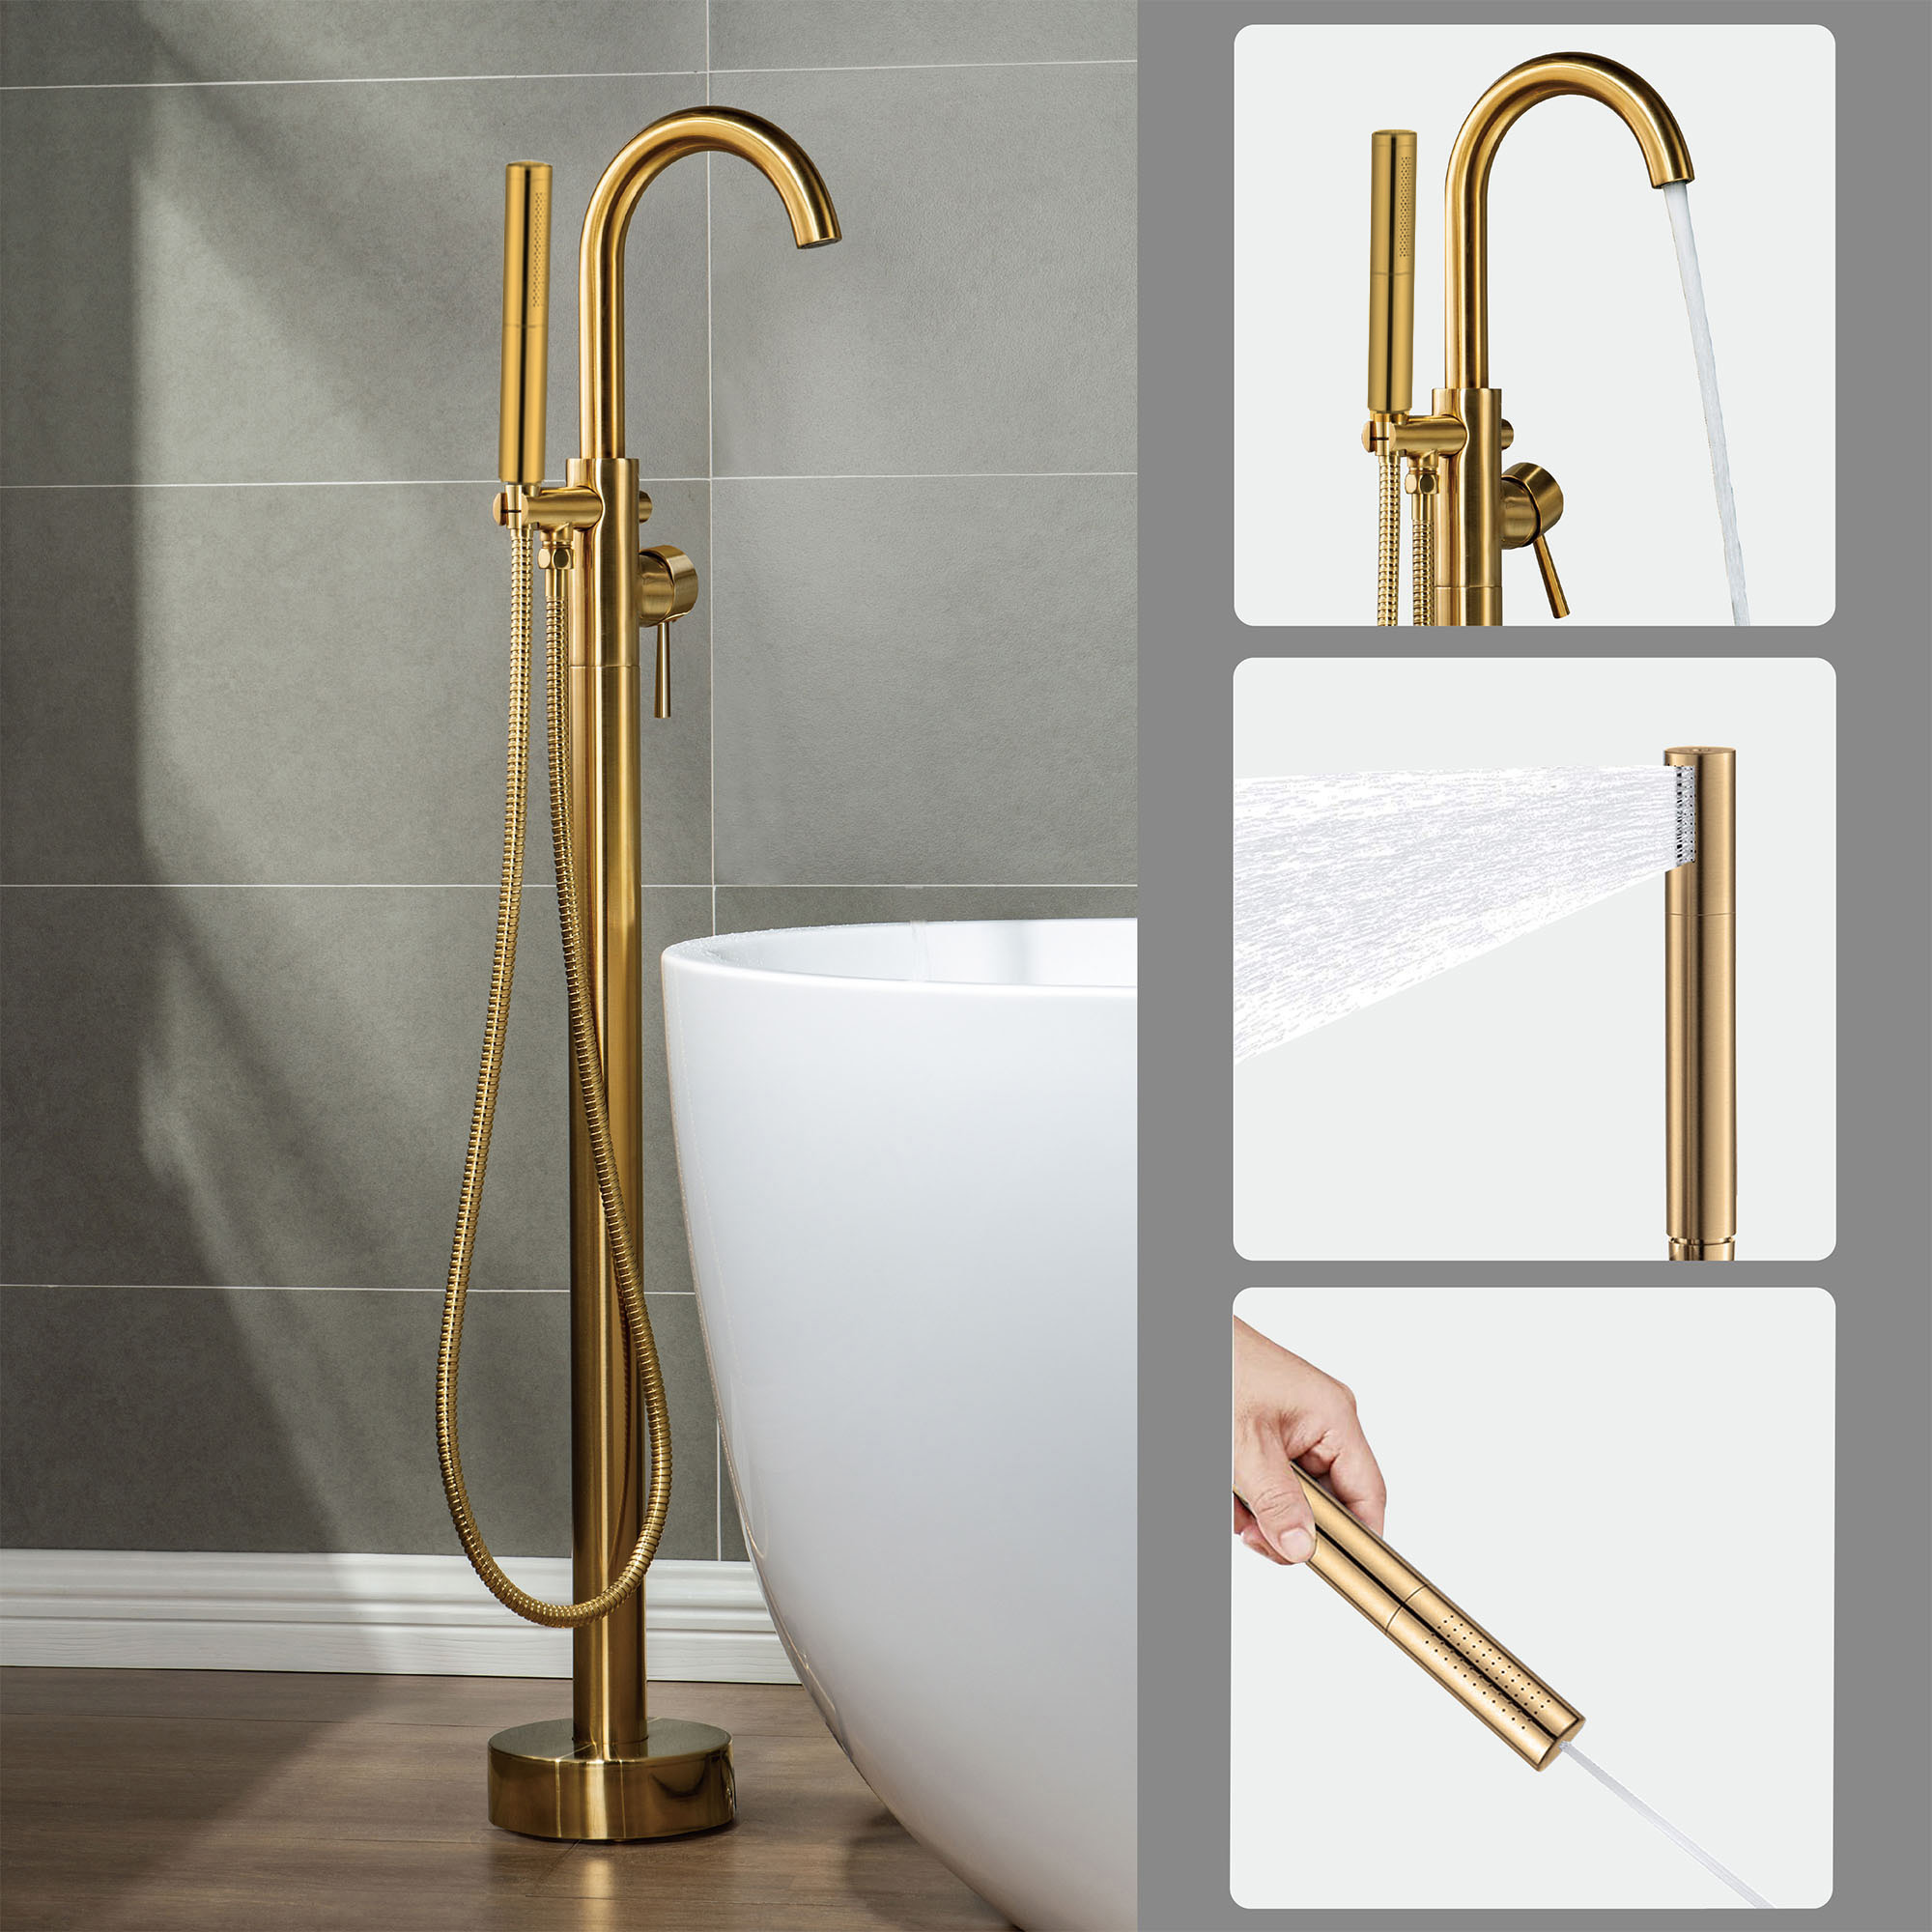  WOODBRIDGE F0007BGDR Contemporary Single Handle Floor Mount Freestanding Tub Filler Faucet with Hand shower in Brushed Gold Finish._14252